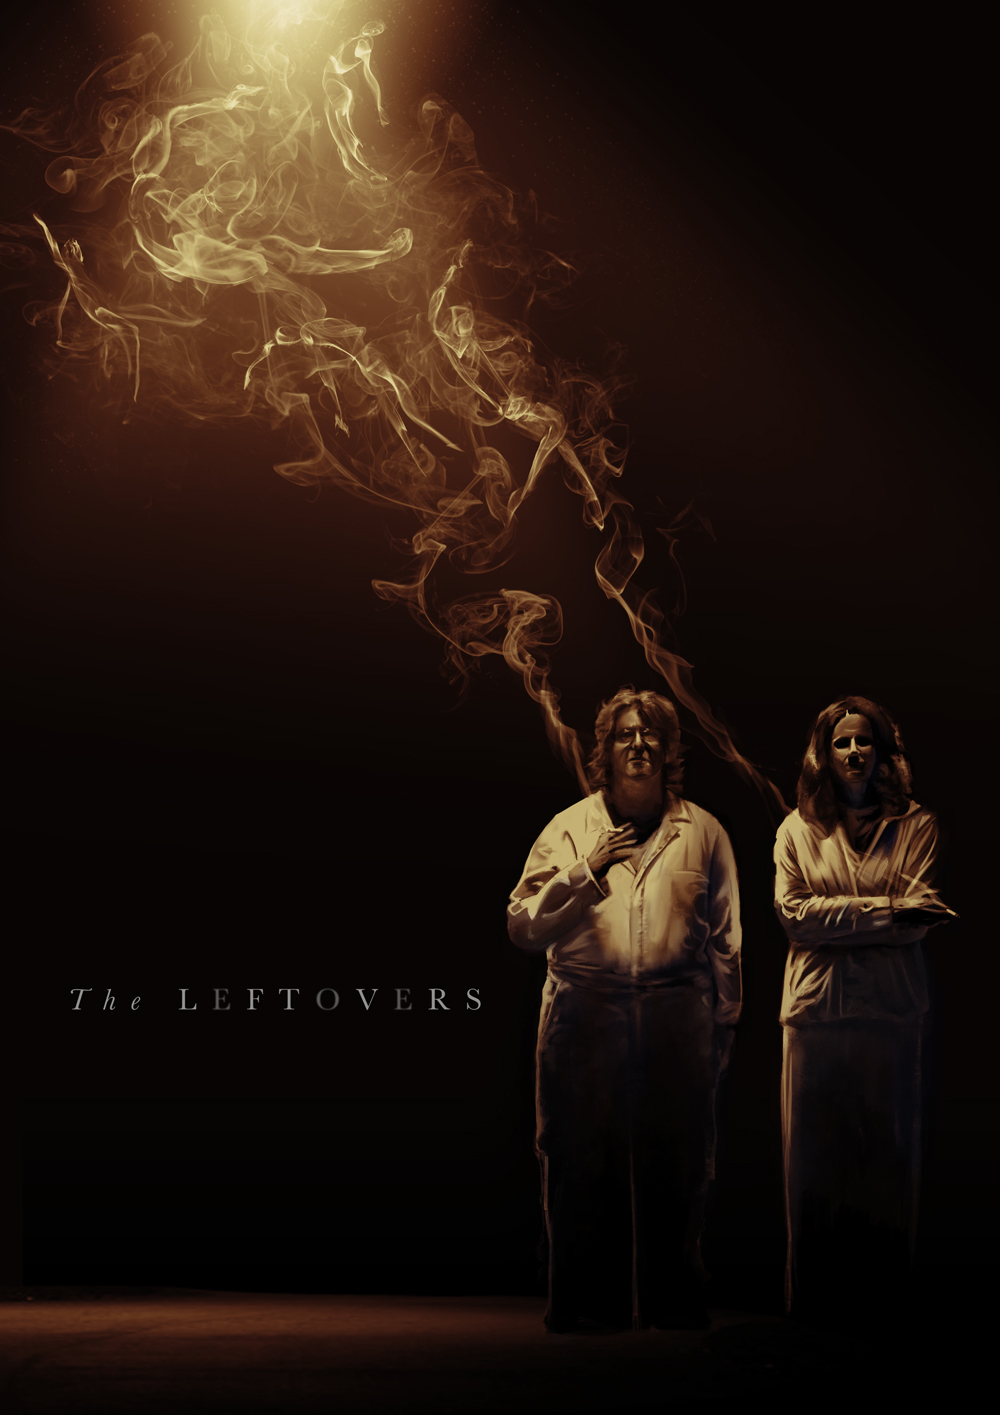 The Leftovers Poster By Punktx30